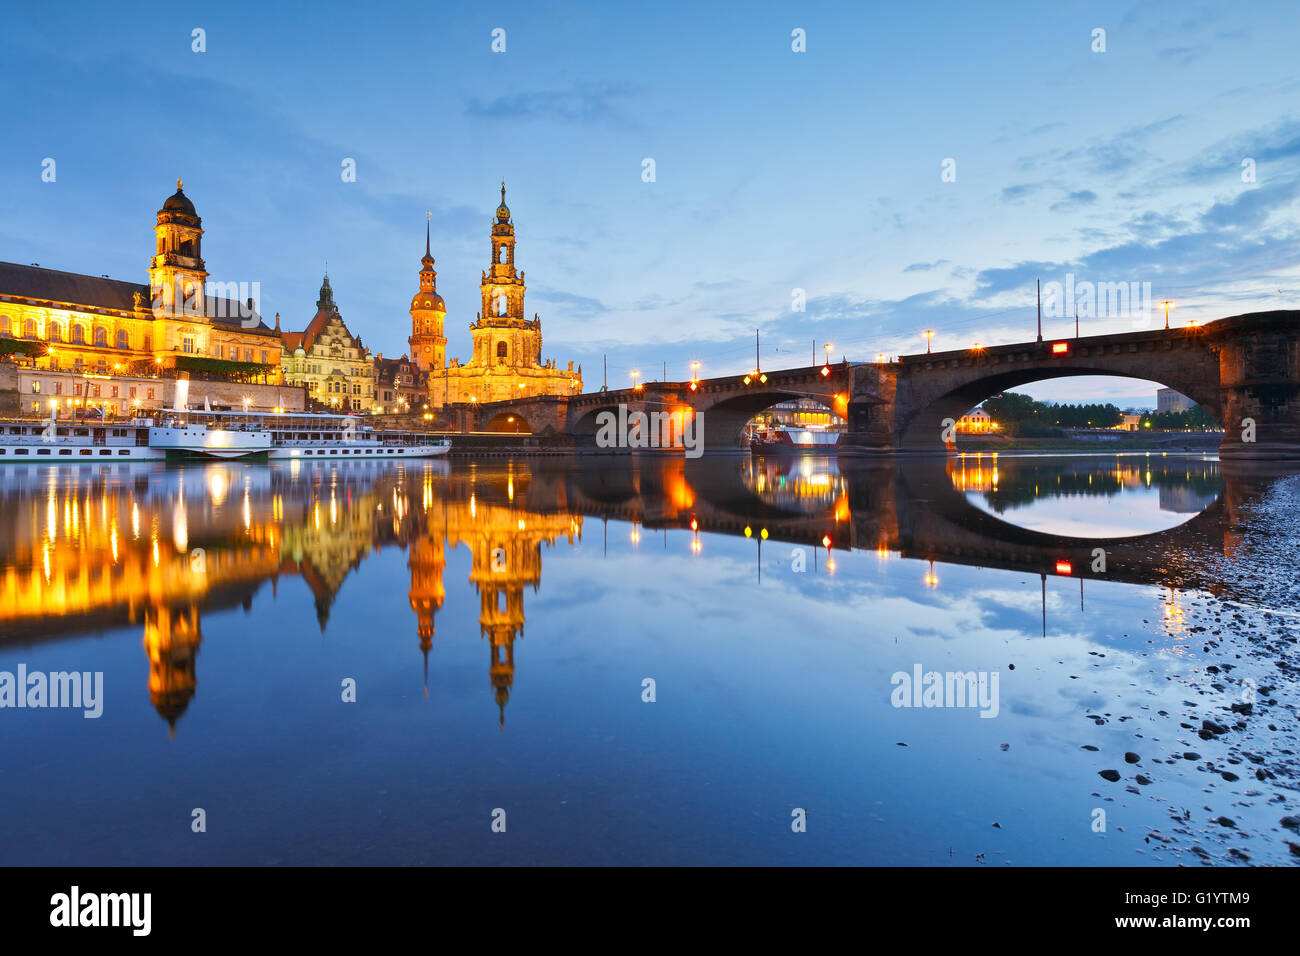 View of the old town of Dresden over river Elbe, Germany. Stock Photo